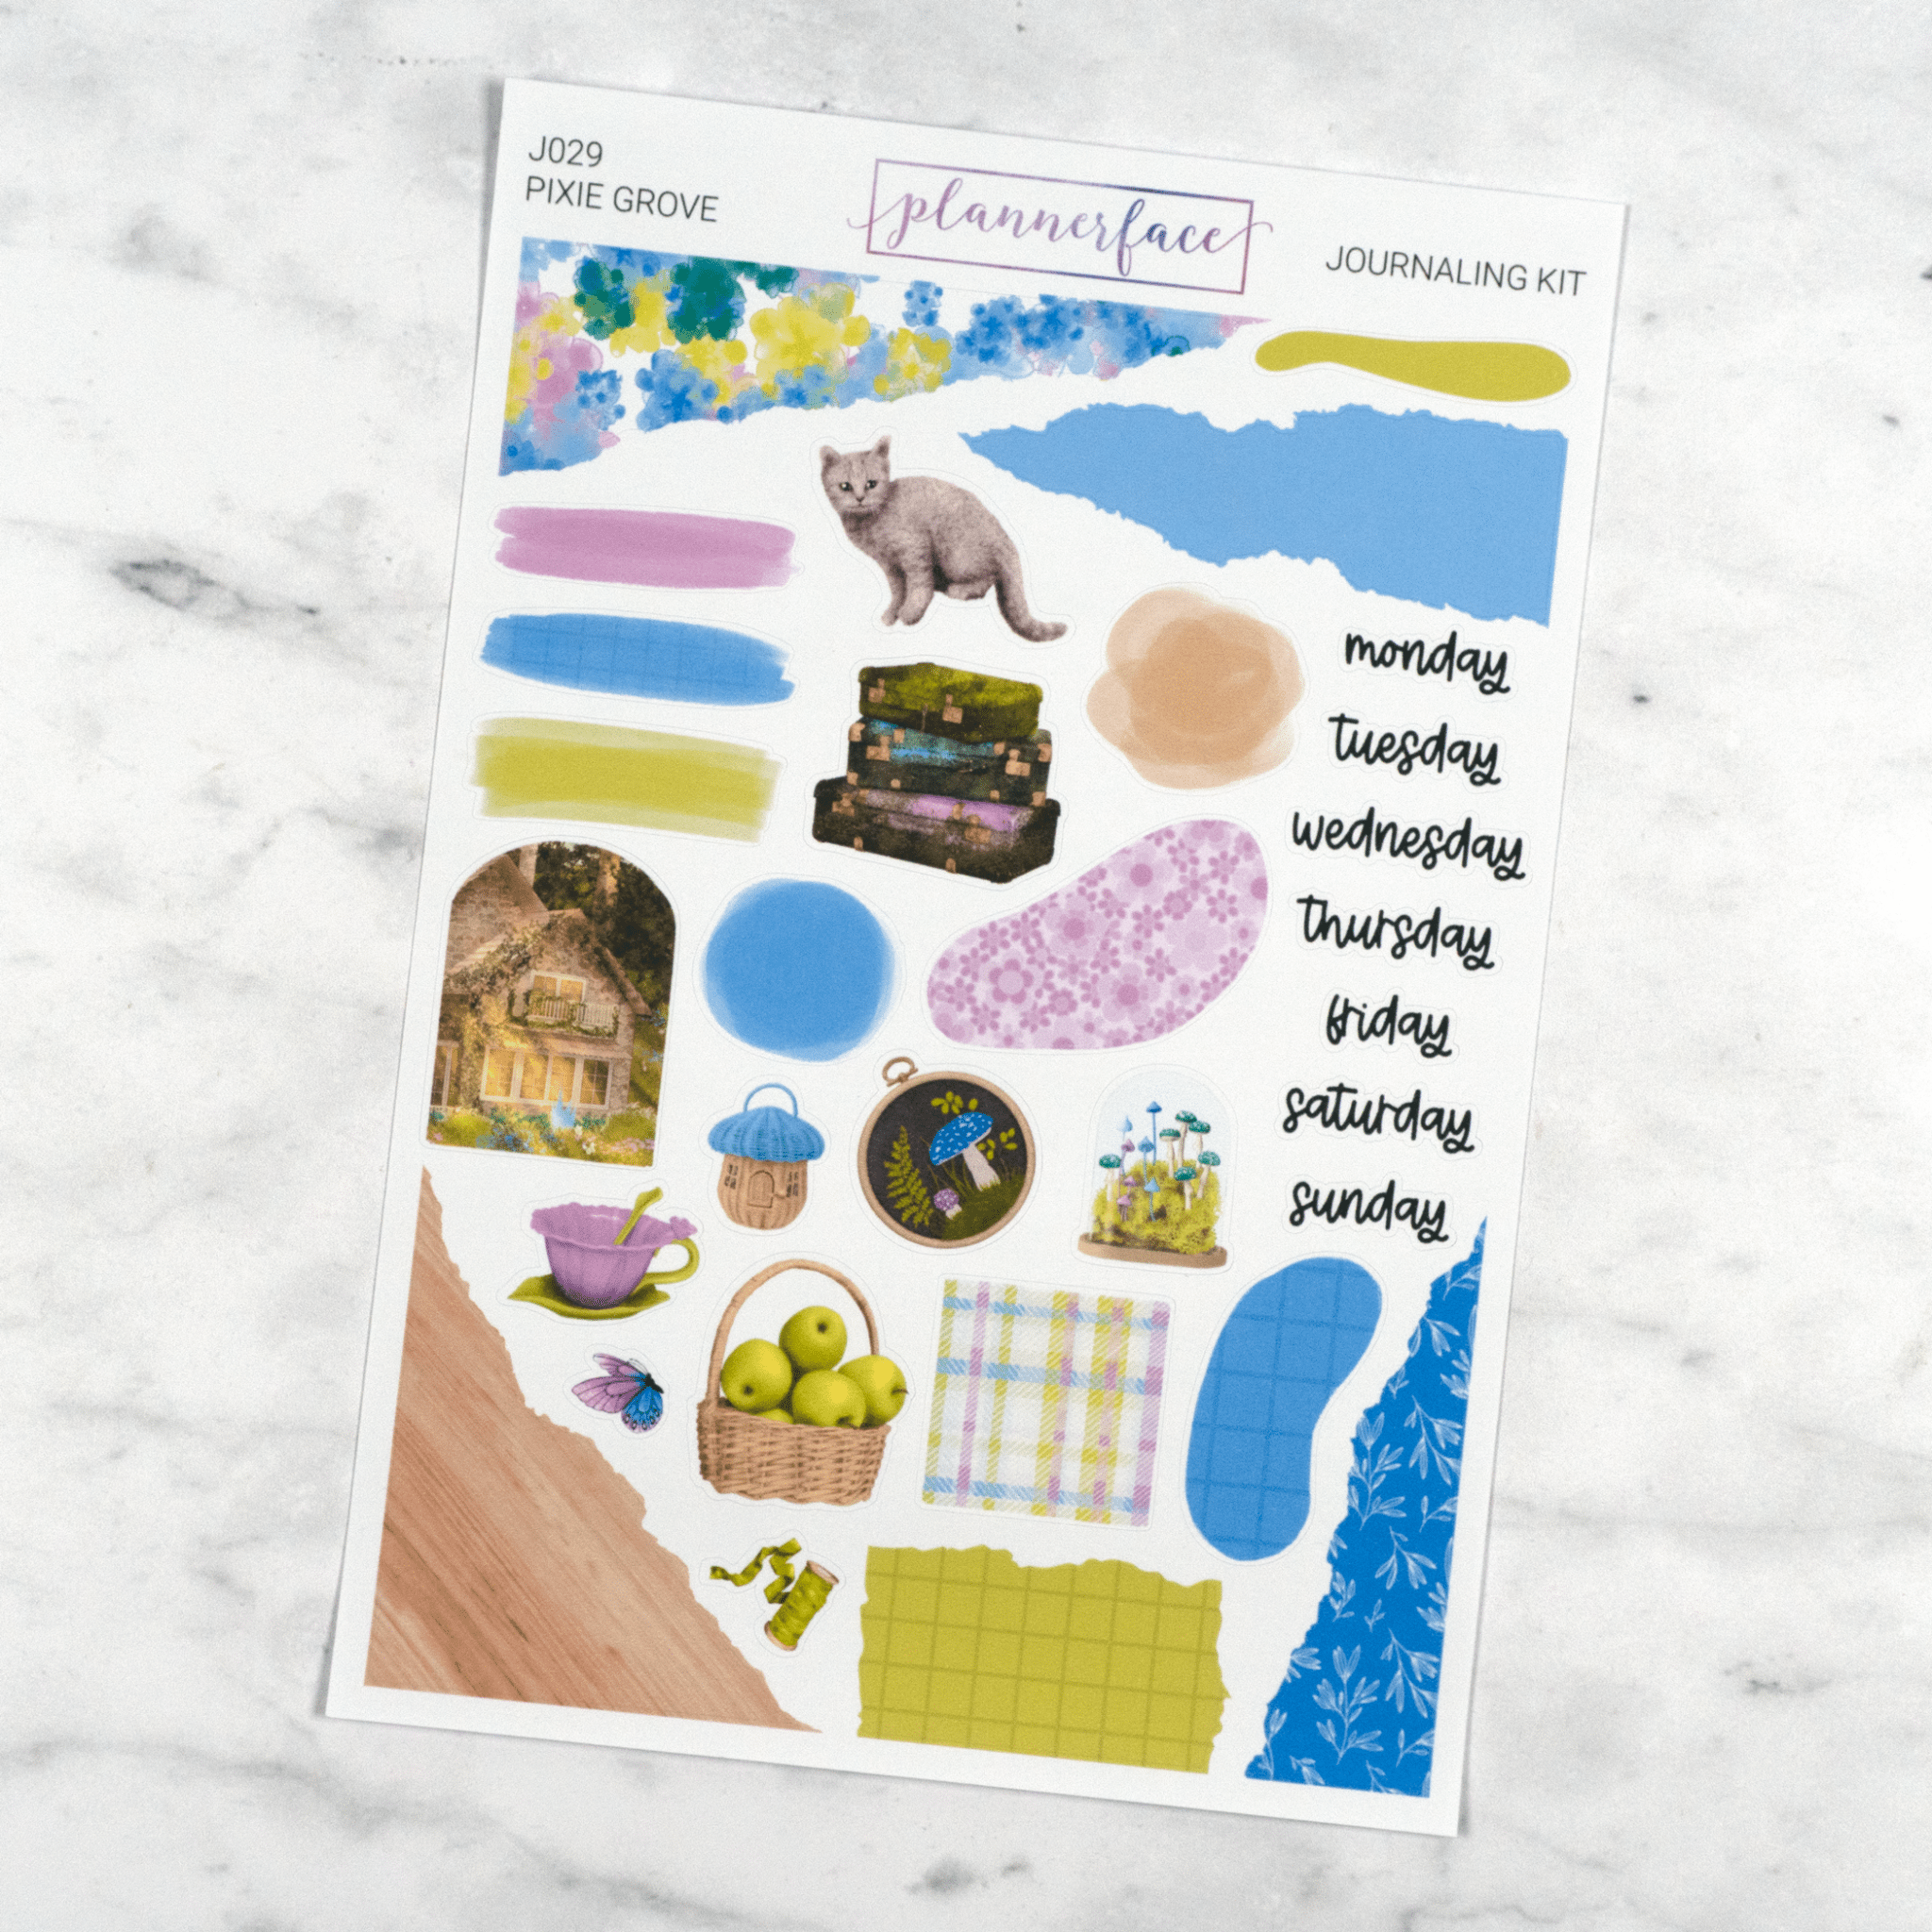 Pixie Grove | Journaling Kit by Plannerface